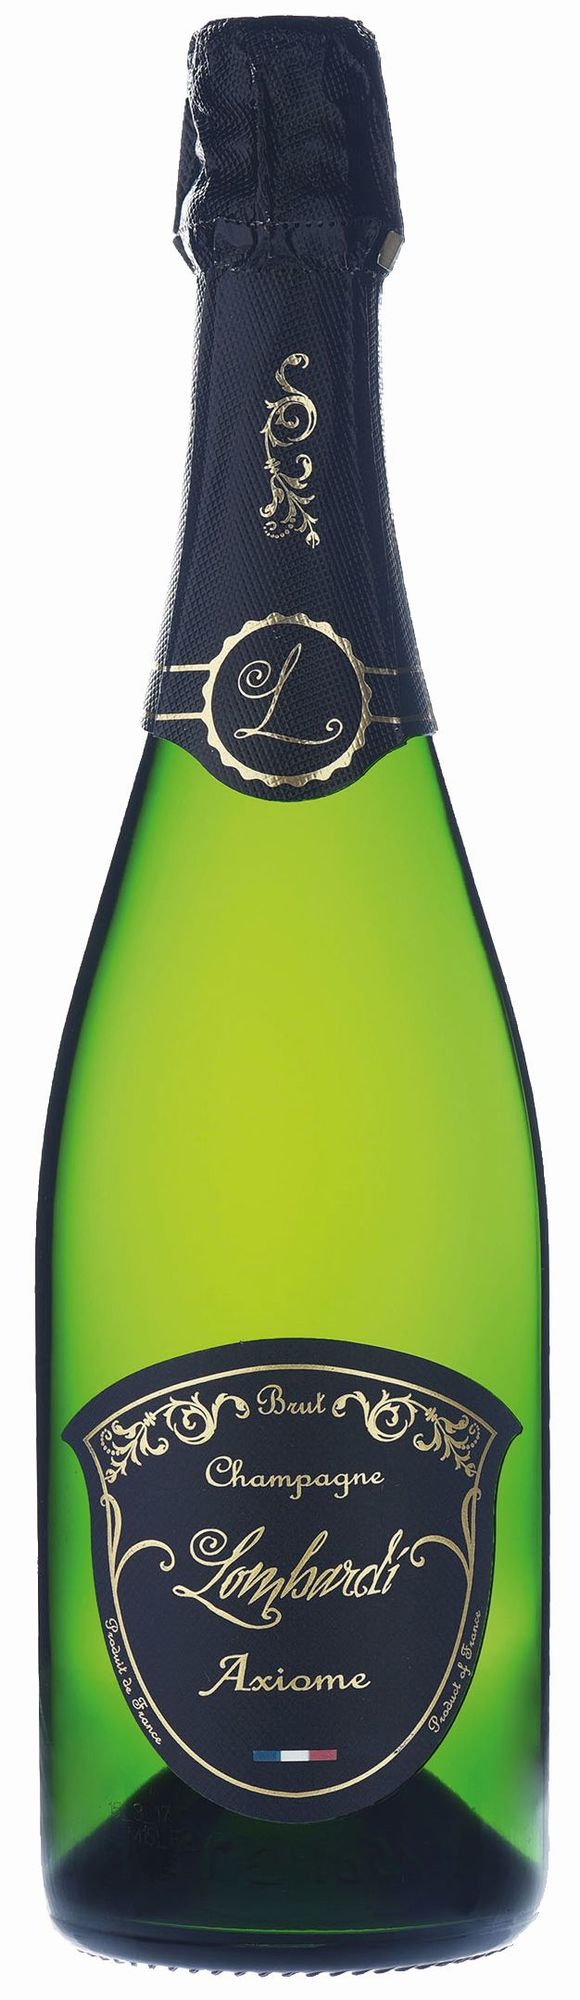 Champagne Lombardi Axiome Brut Champagner, 0,75Ltr